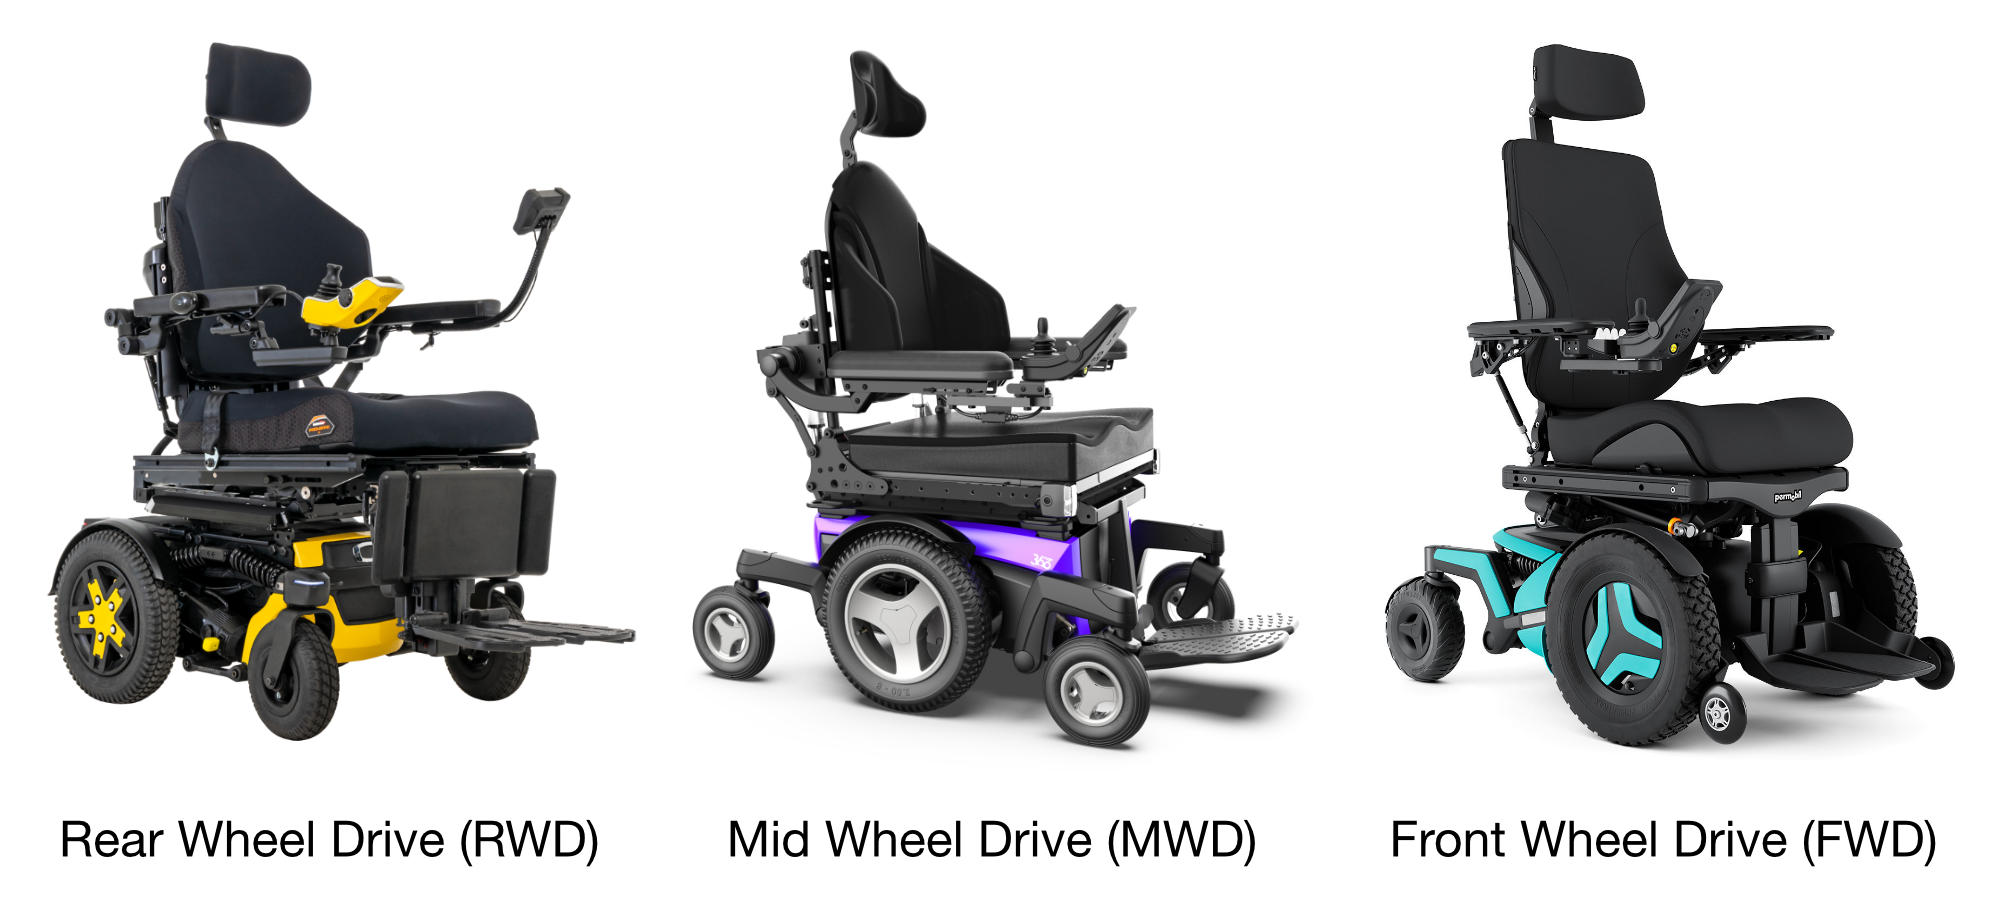 Picture of three wheelchairs showing the three drive wheel positions